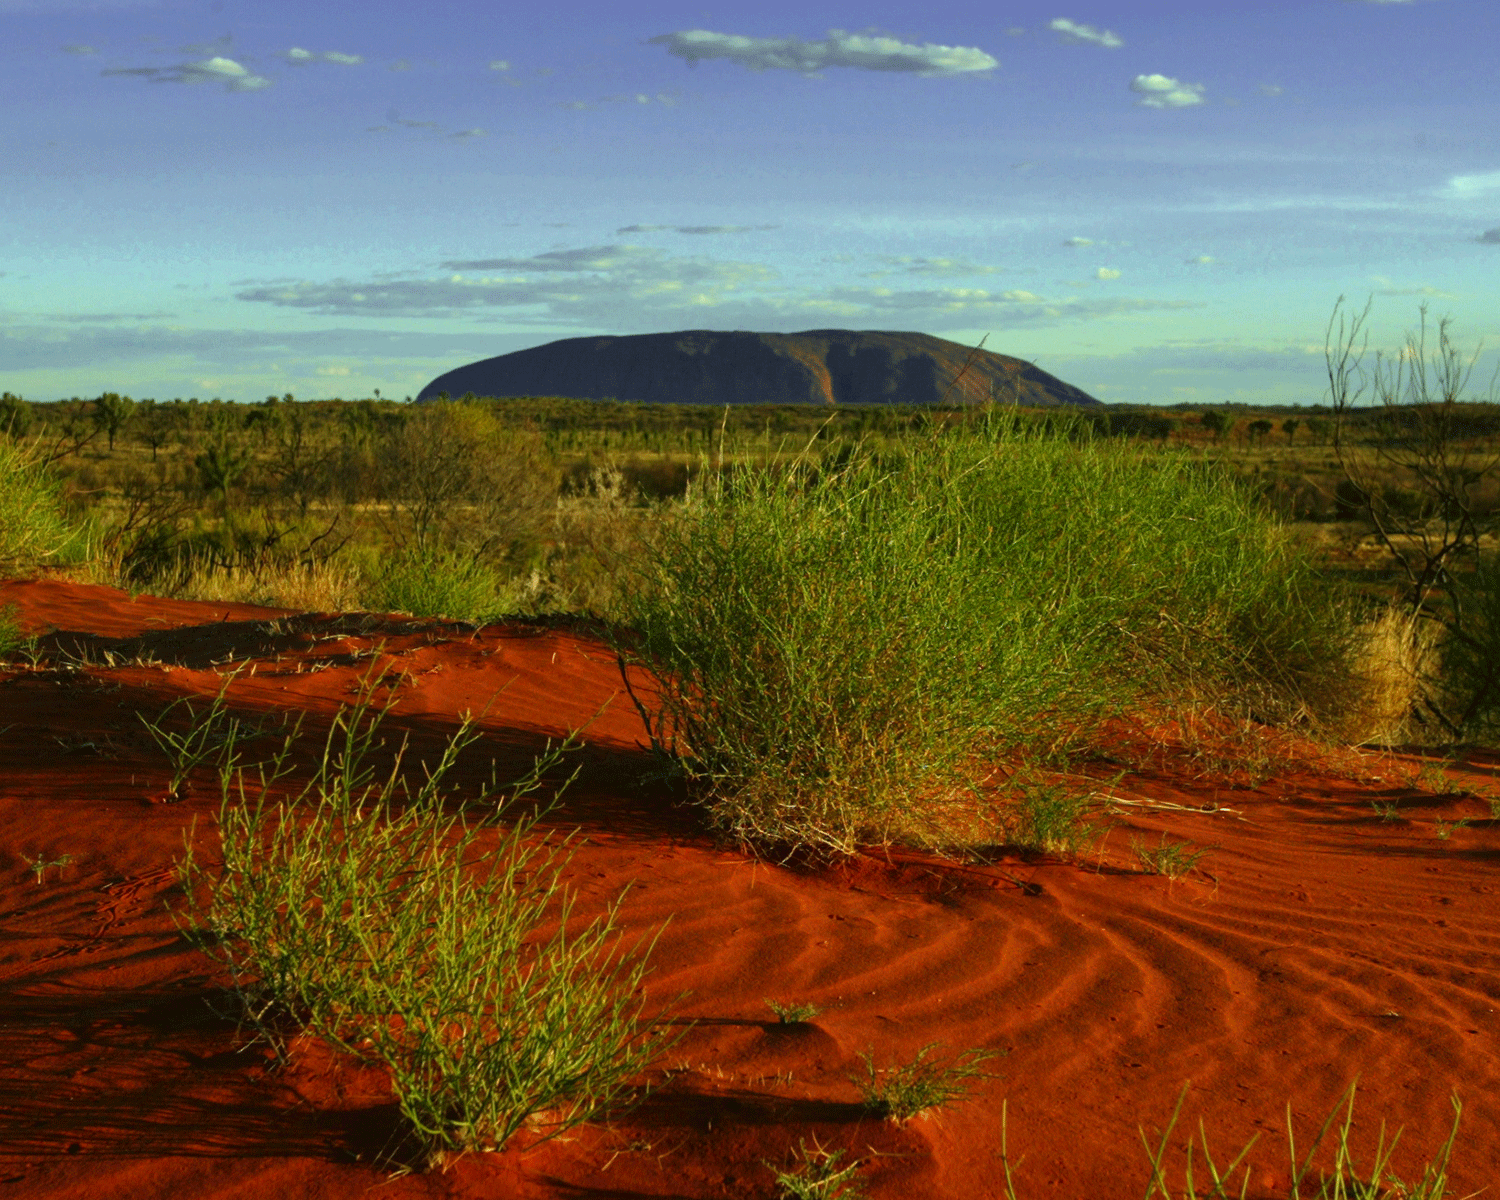 Uluru, or Ayer's Rock, in Australia. Experts have said the history of Aboriginal peoples "needs telling"